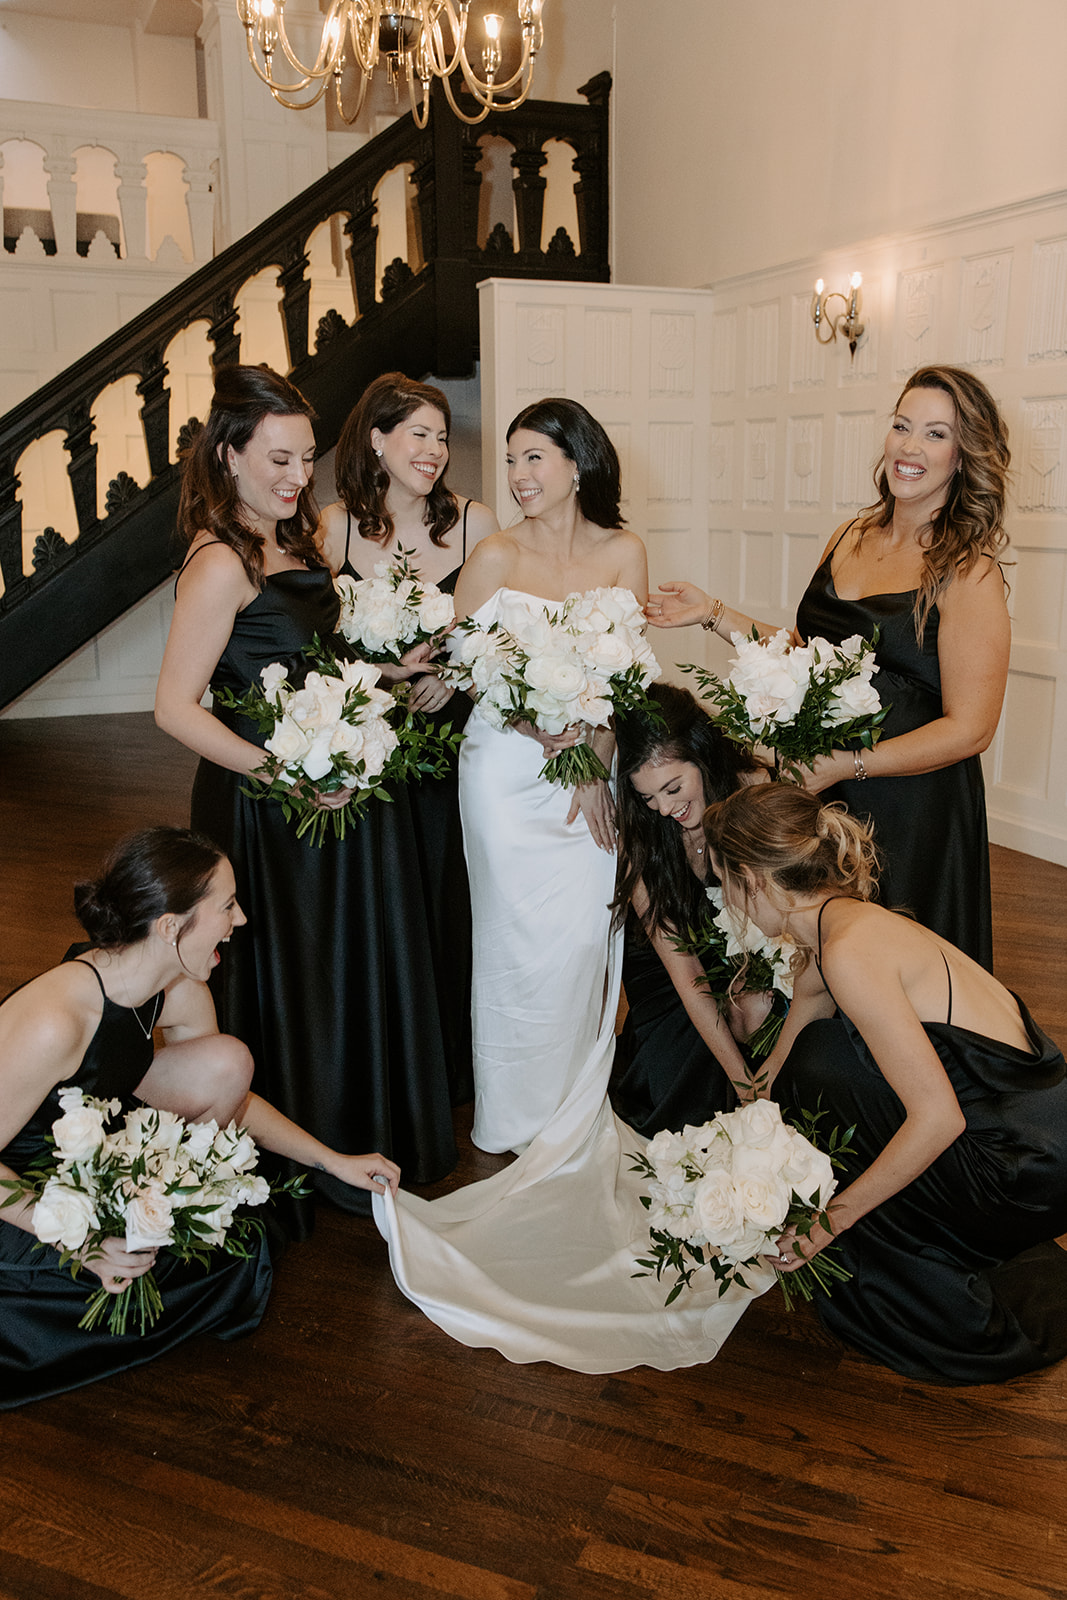 Bridal party posing with bride with bouquet of white flowers at Alden Castle.